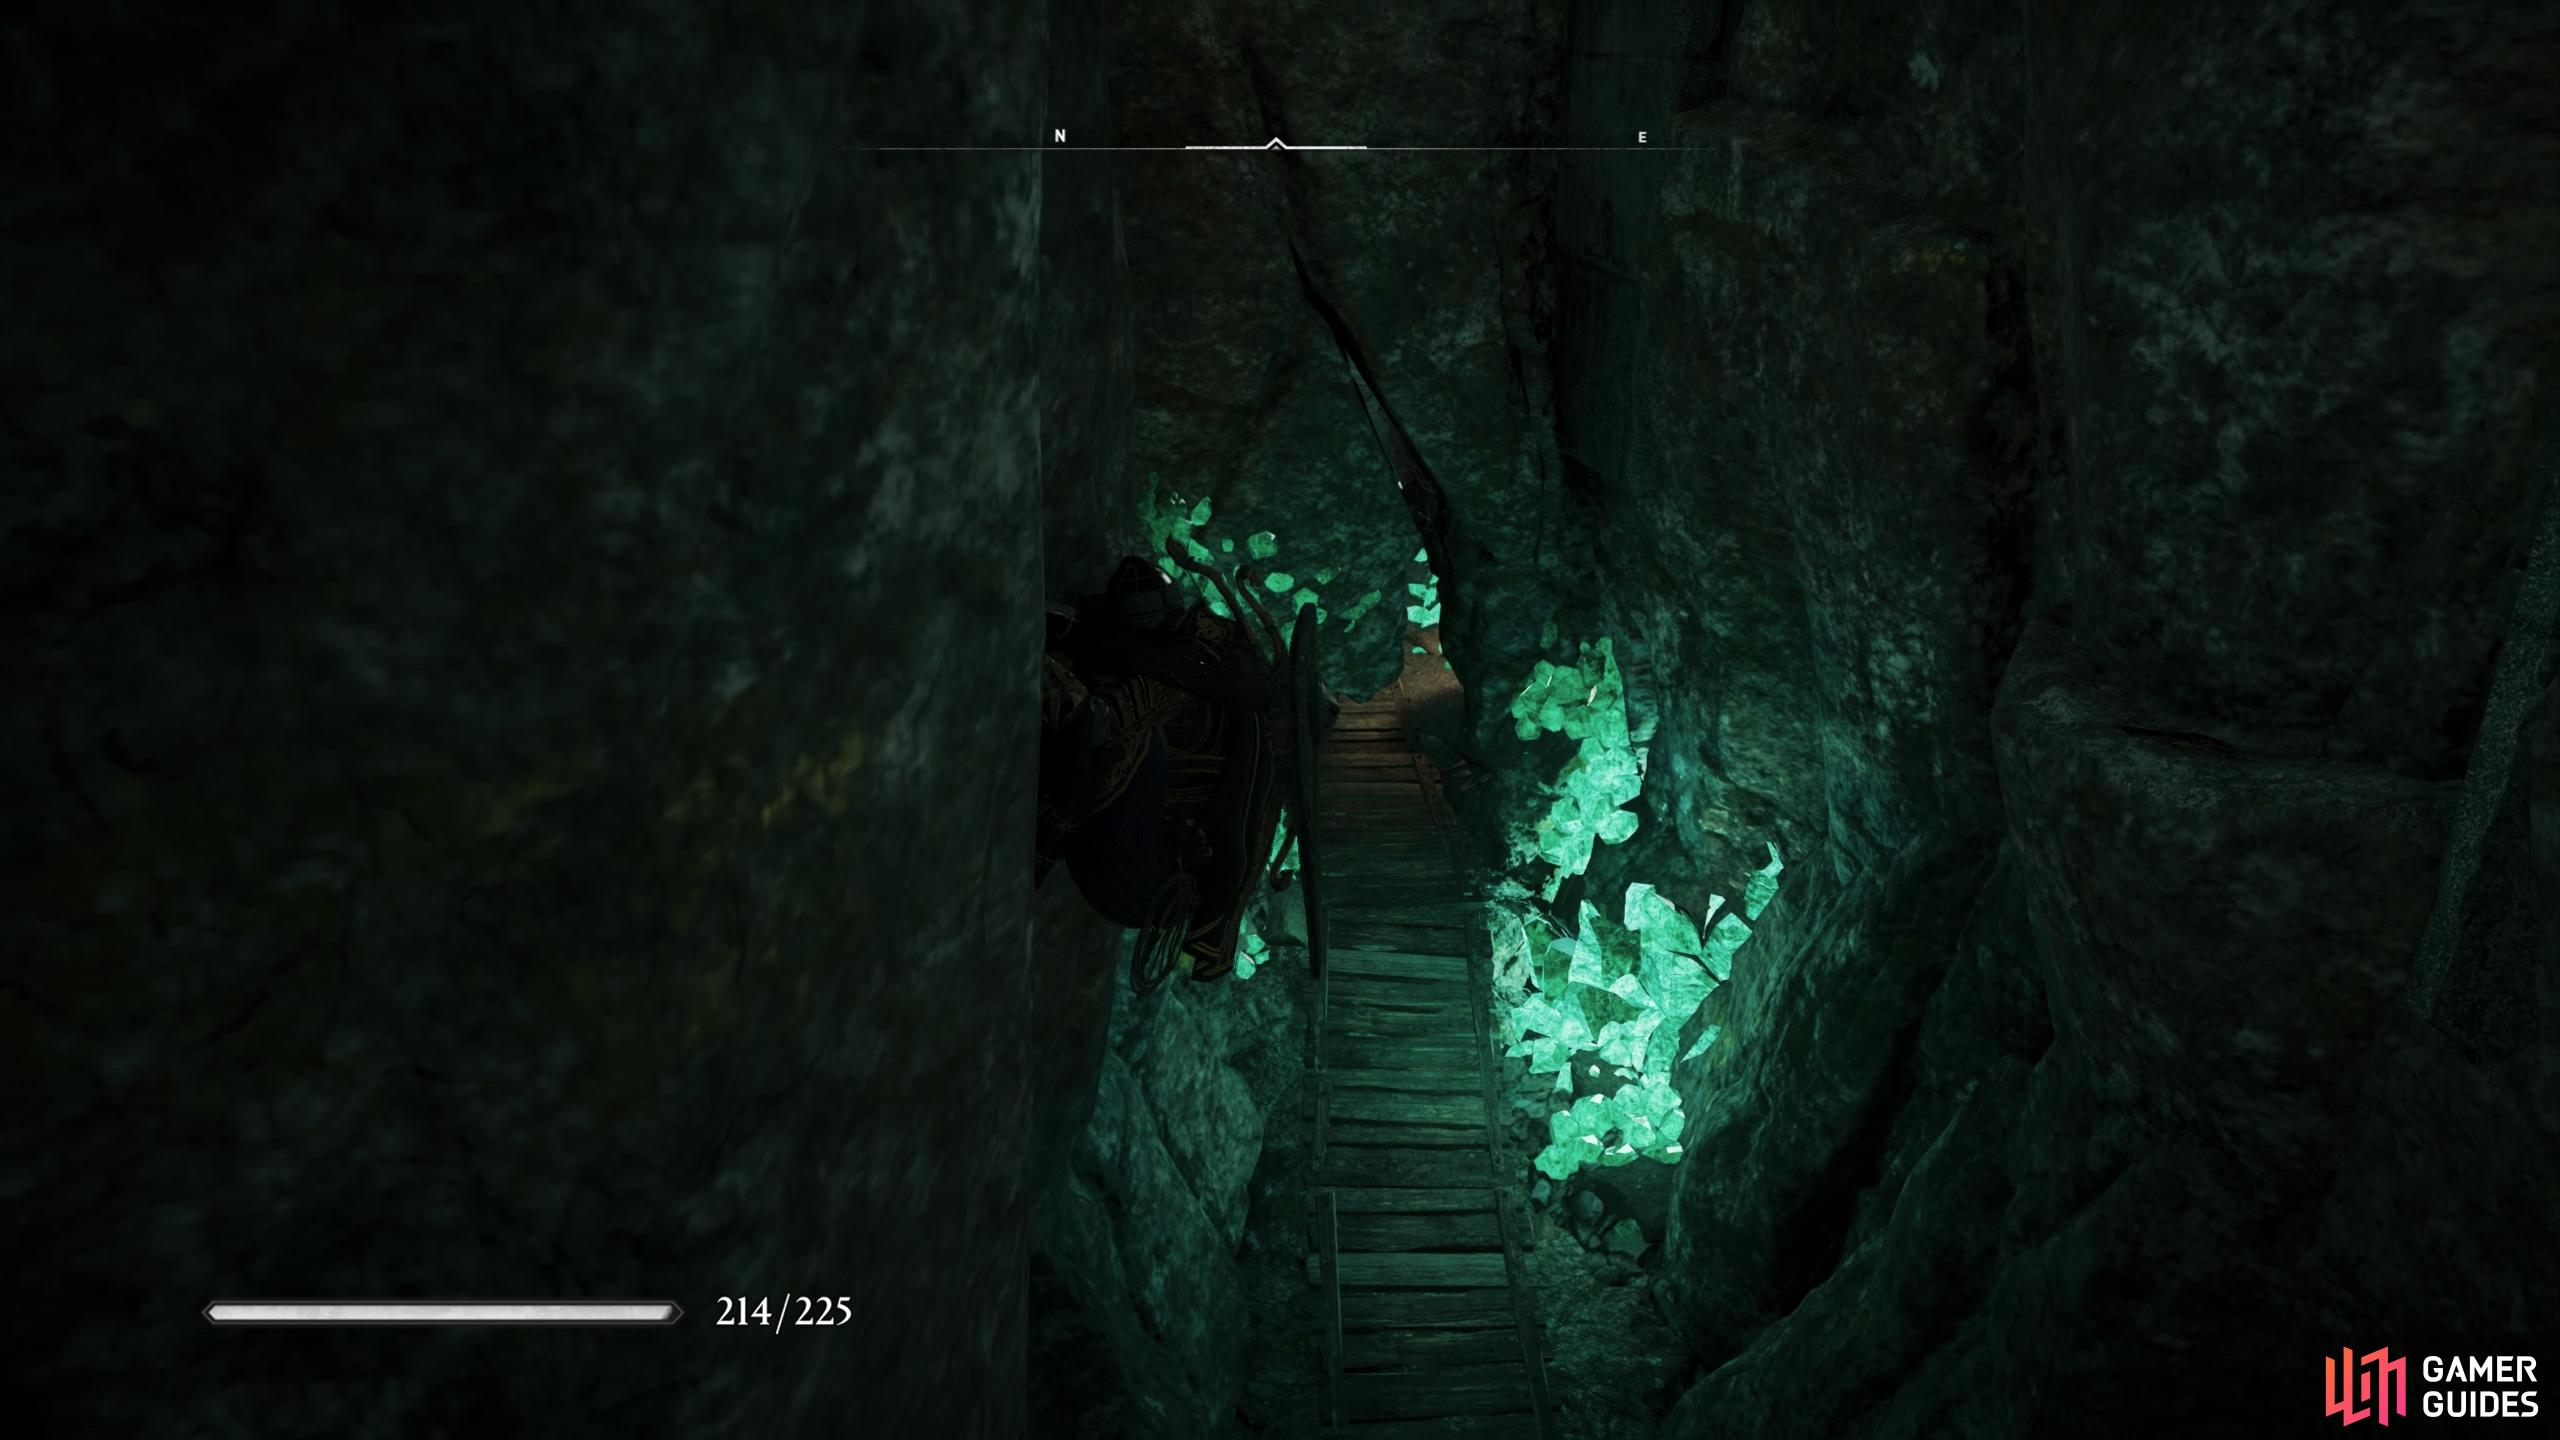 You'll need to look for this crack in the northeast wall to access the area where the merchant Dar resides.